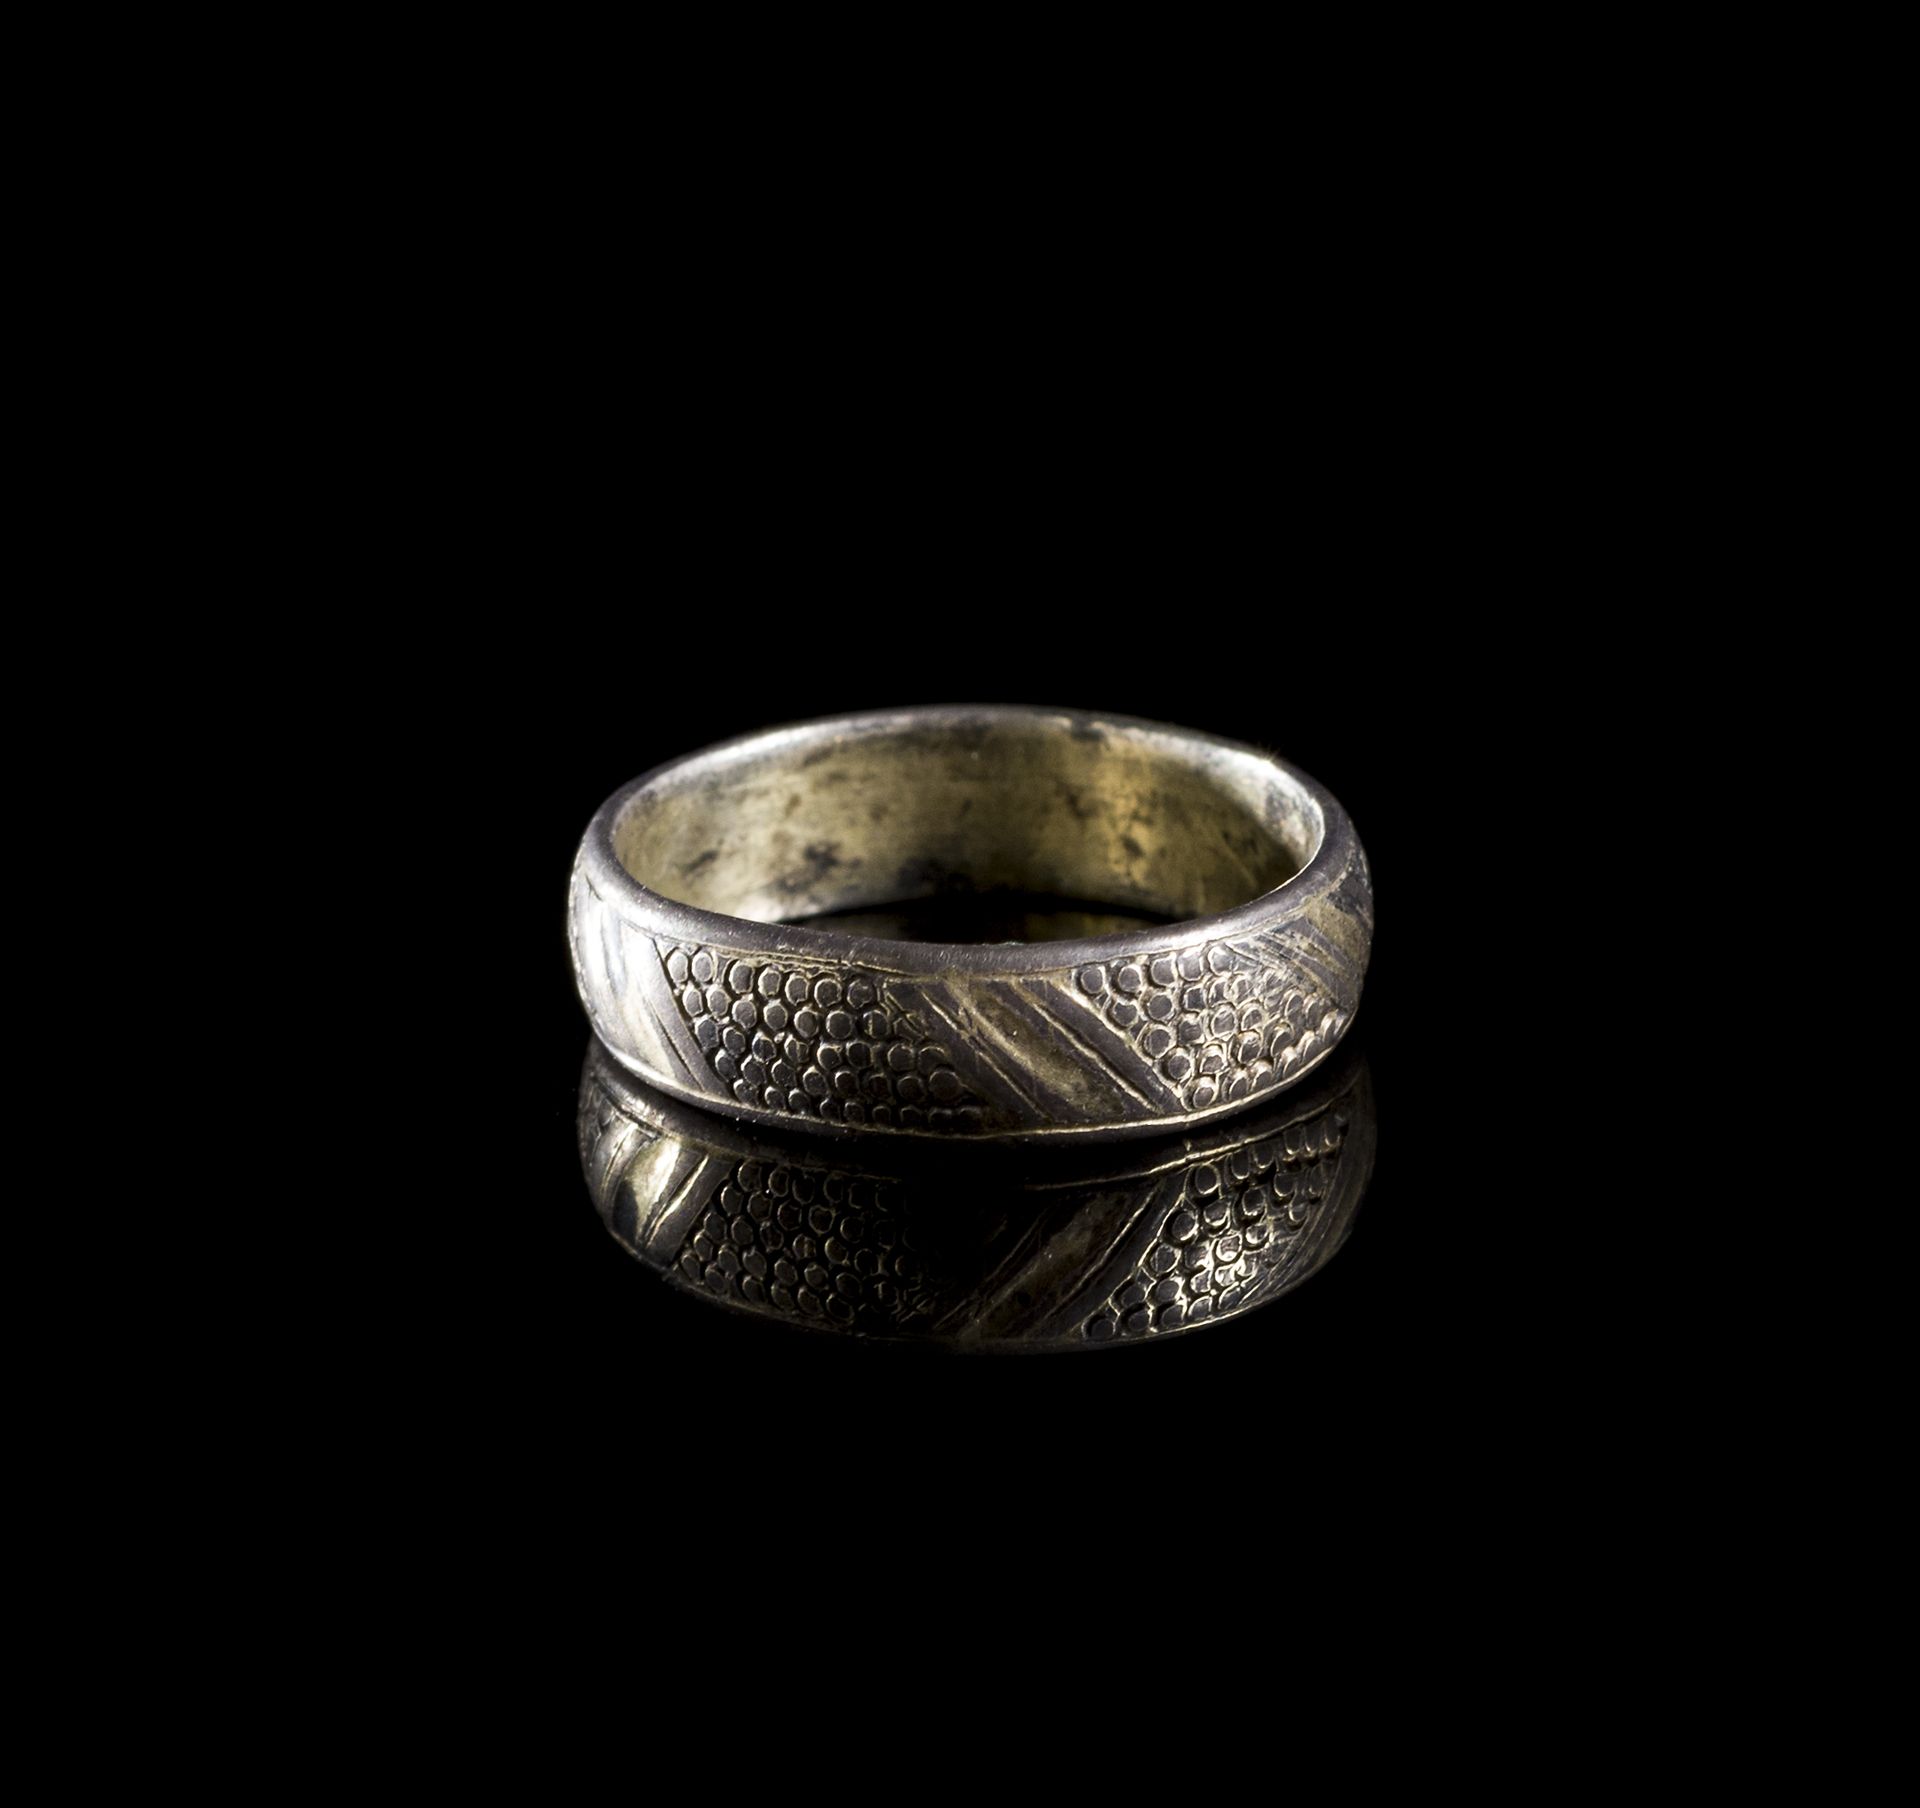 Picture of a post-medieval silver guilt ring found in Pembrokeshire